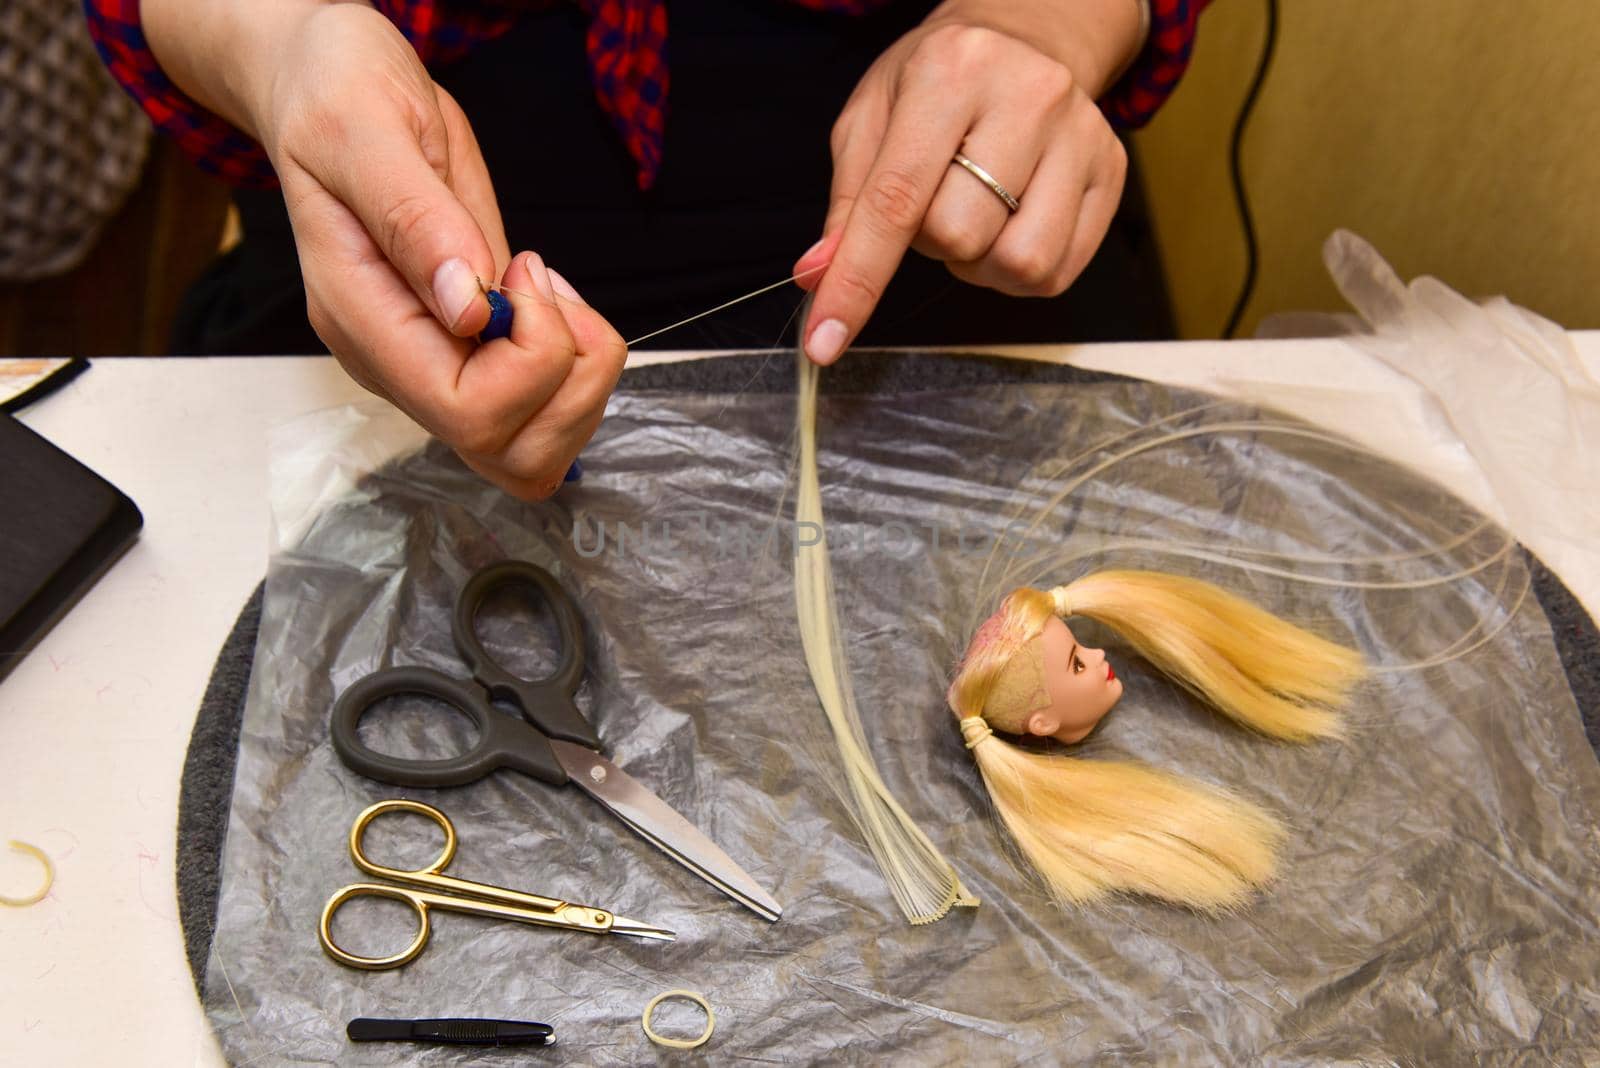 female hands and homemade tool on the table, how to make a hairstyle for a doll, hobby concept by karpovkottt